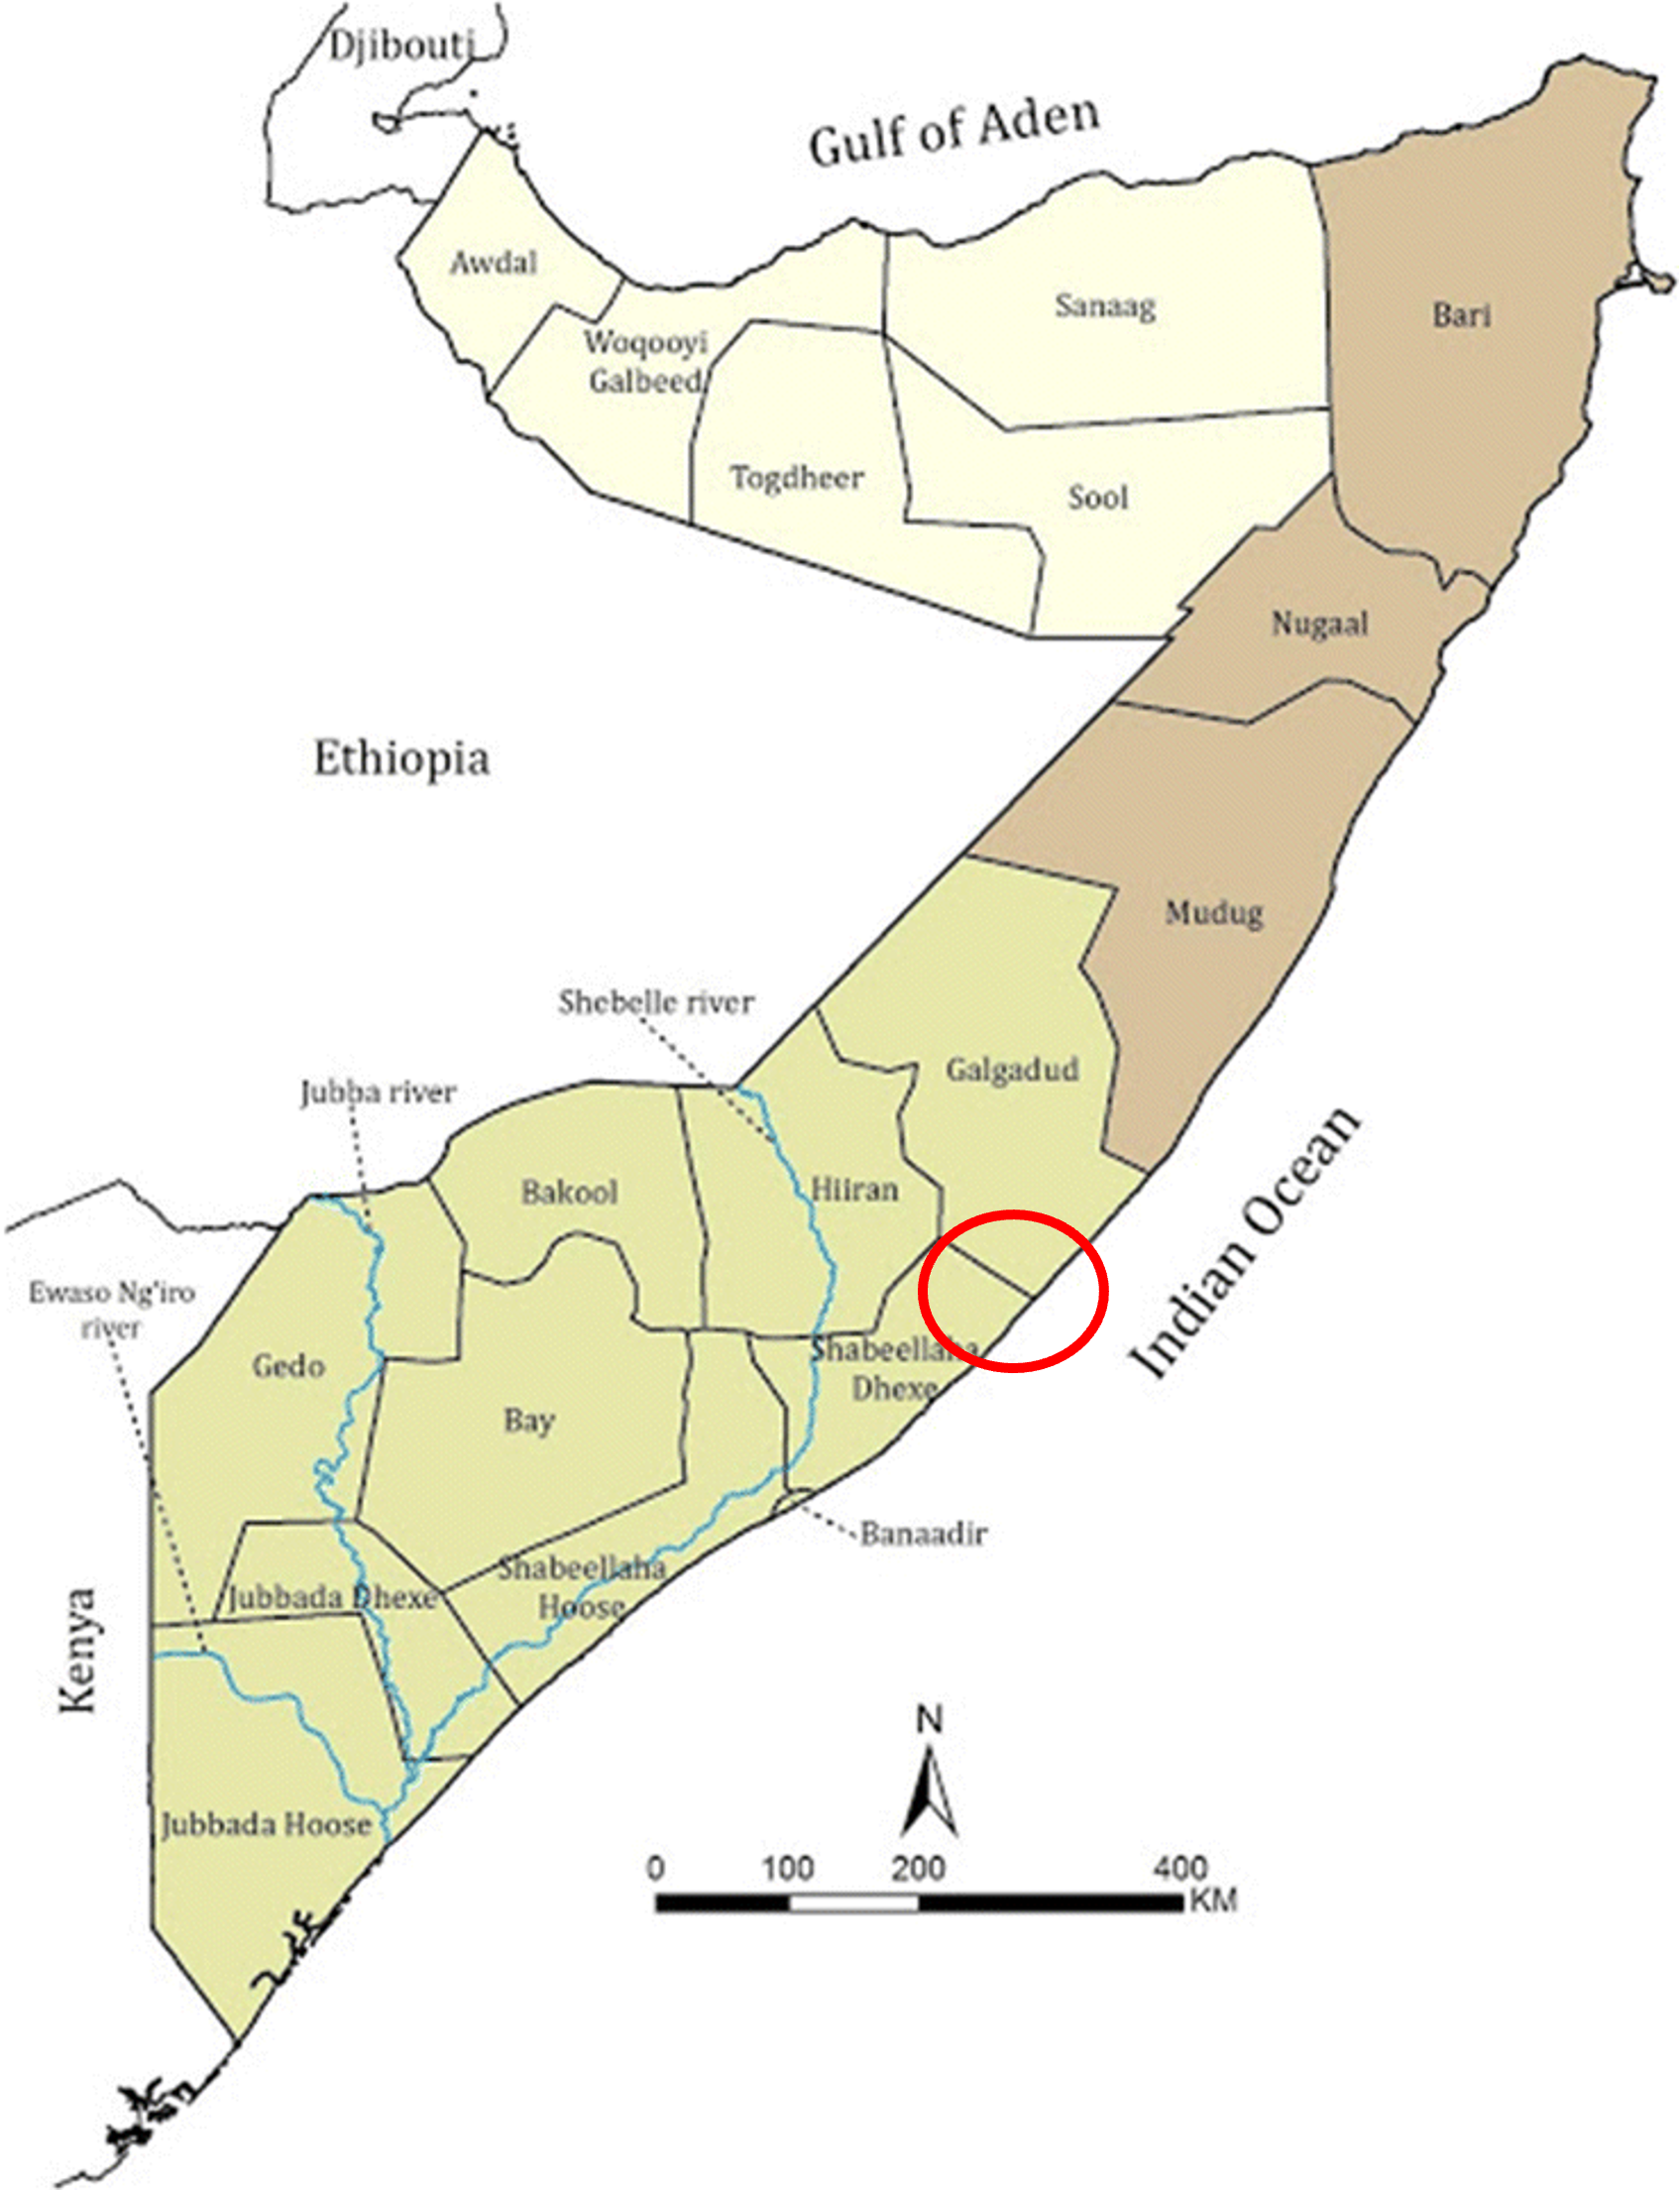 Somalia Map, Attack at the border of Galguduud and Middle Shabelle Provinces